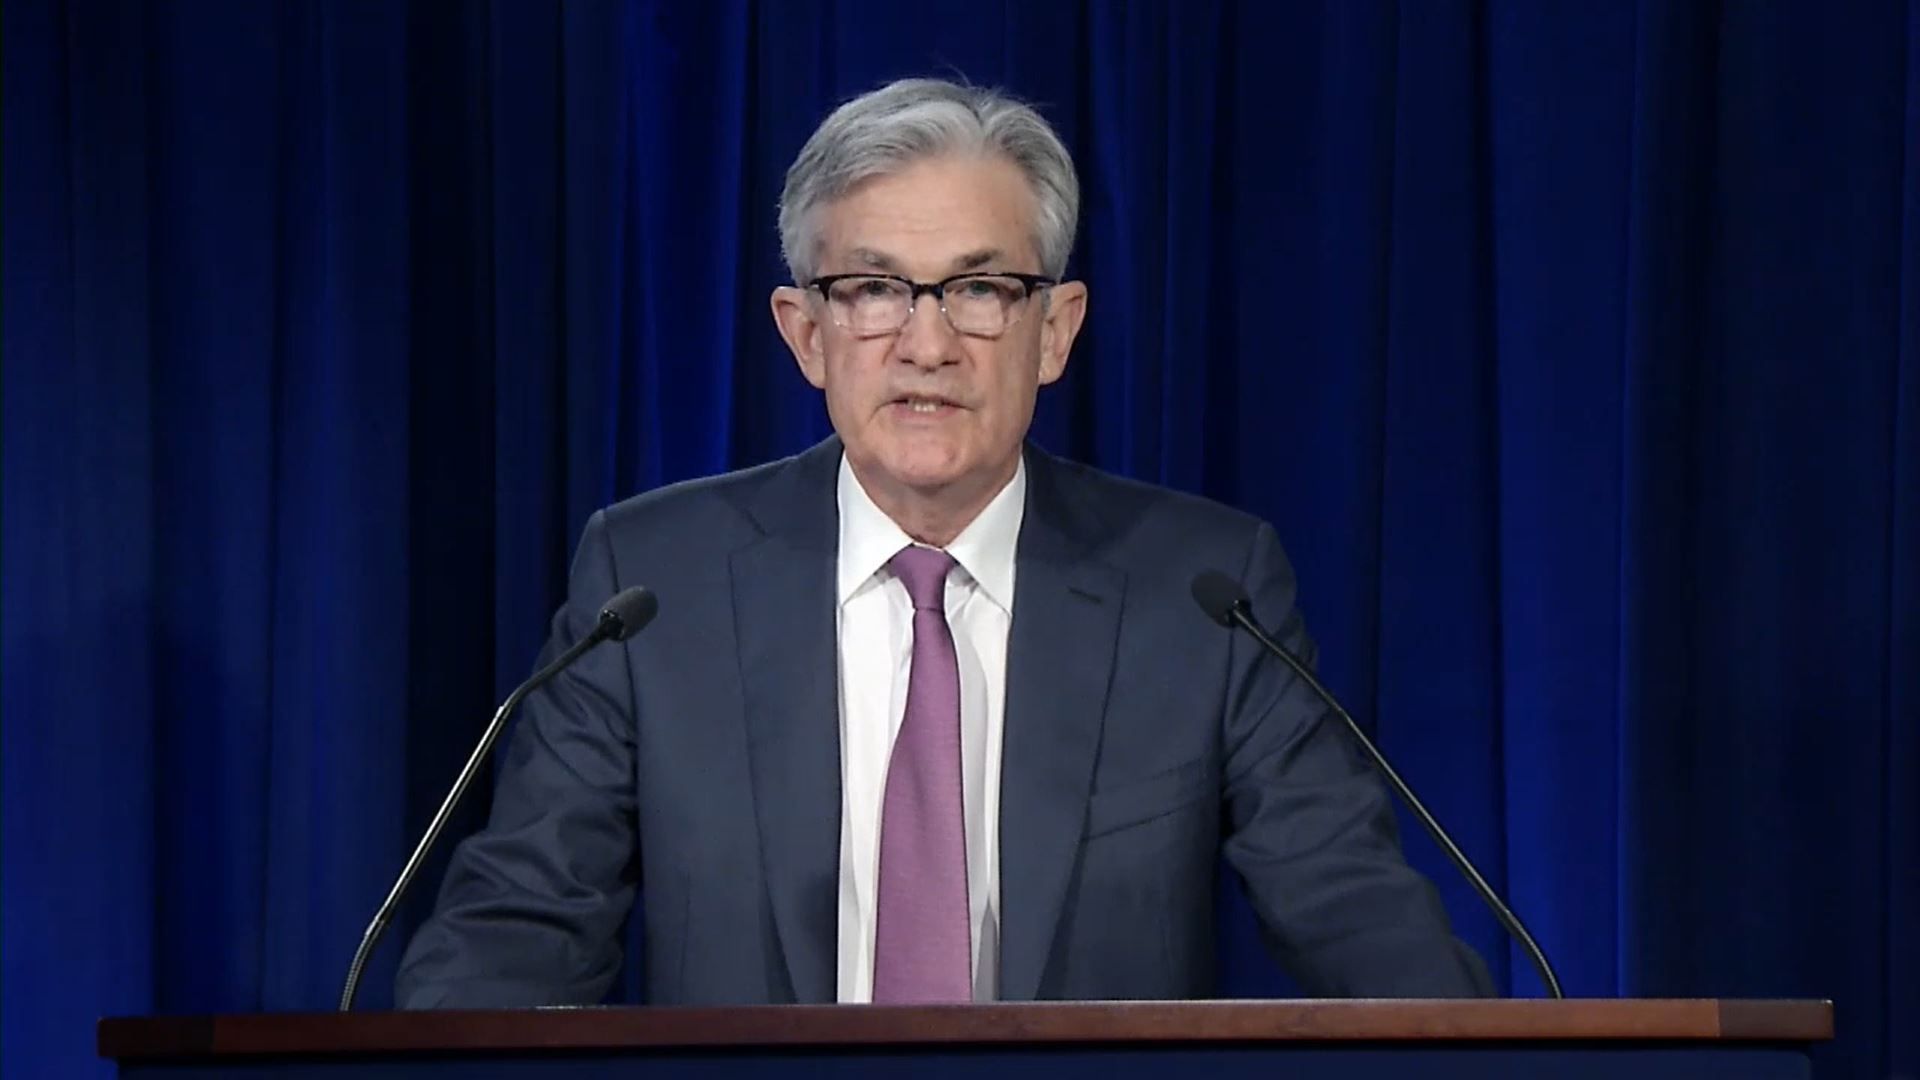 Screengrab of the Federal Reserve chairman Jerome Powell giving a live streamed speech last month